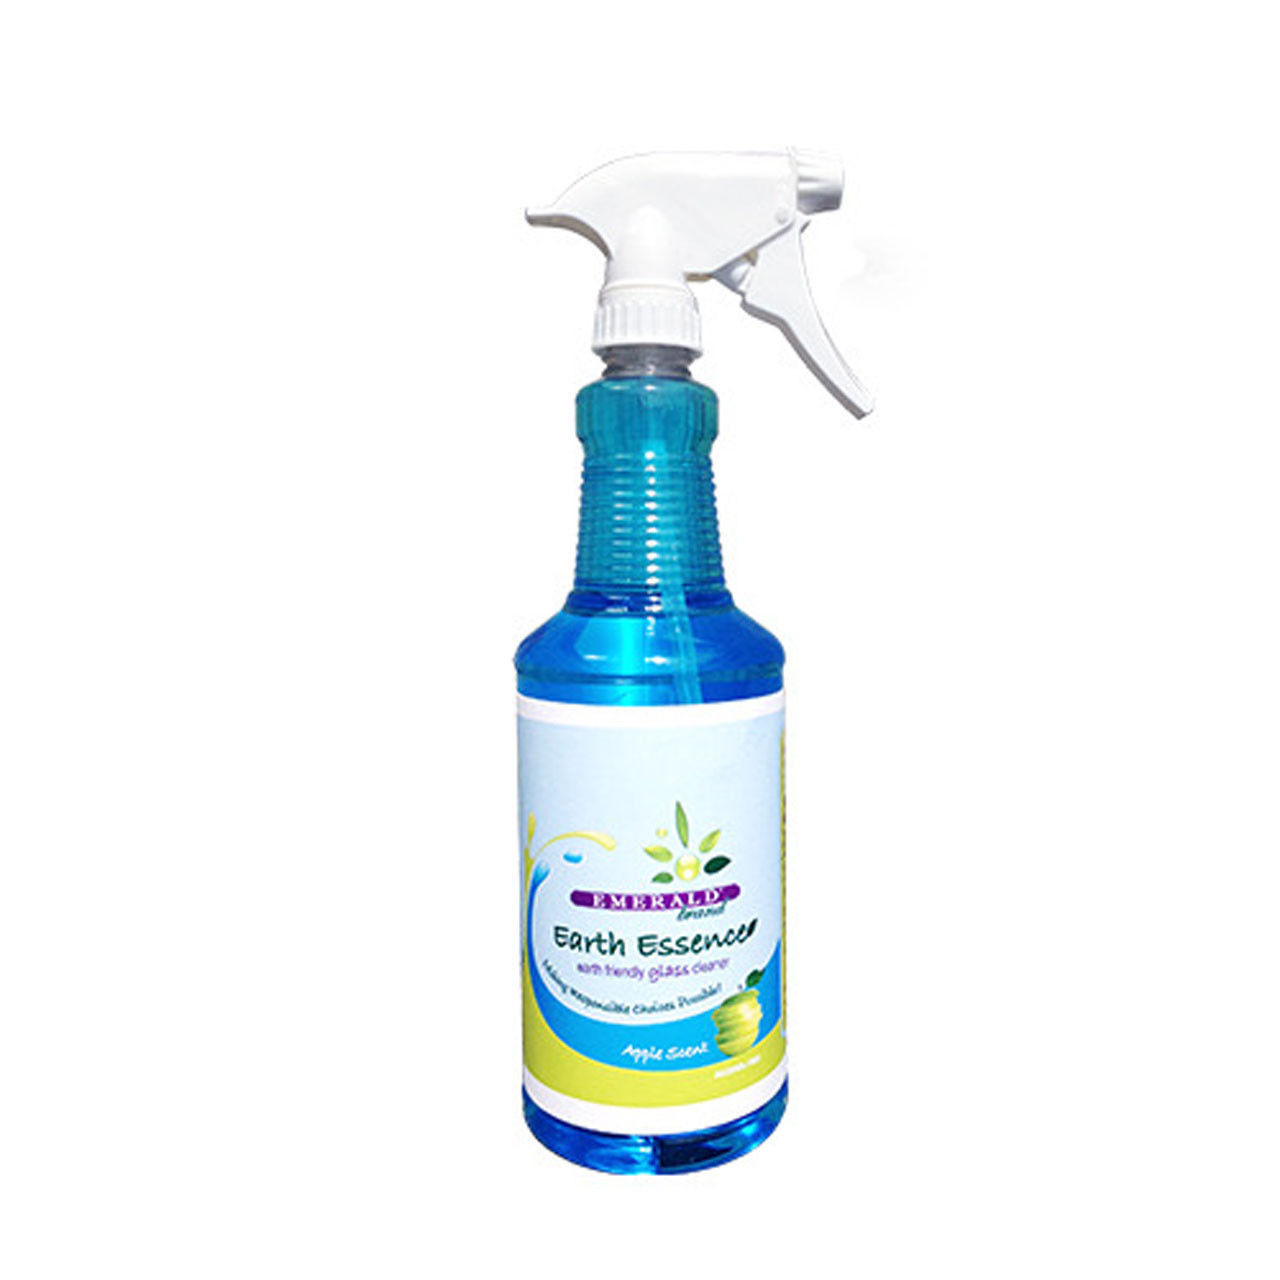 Emerald Earth Essence Ammonia Free Glass Cleaner Questions & Answers